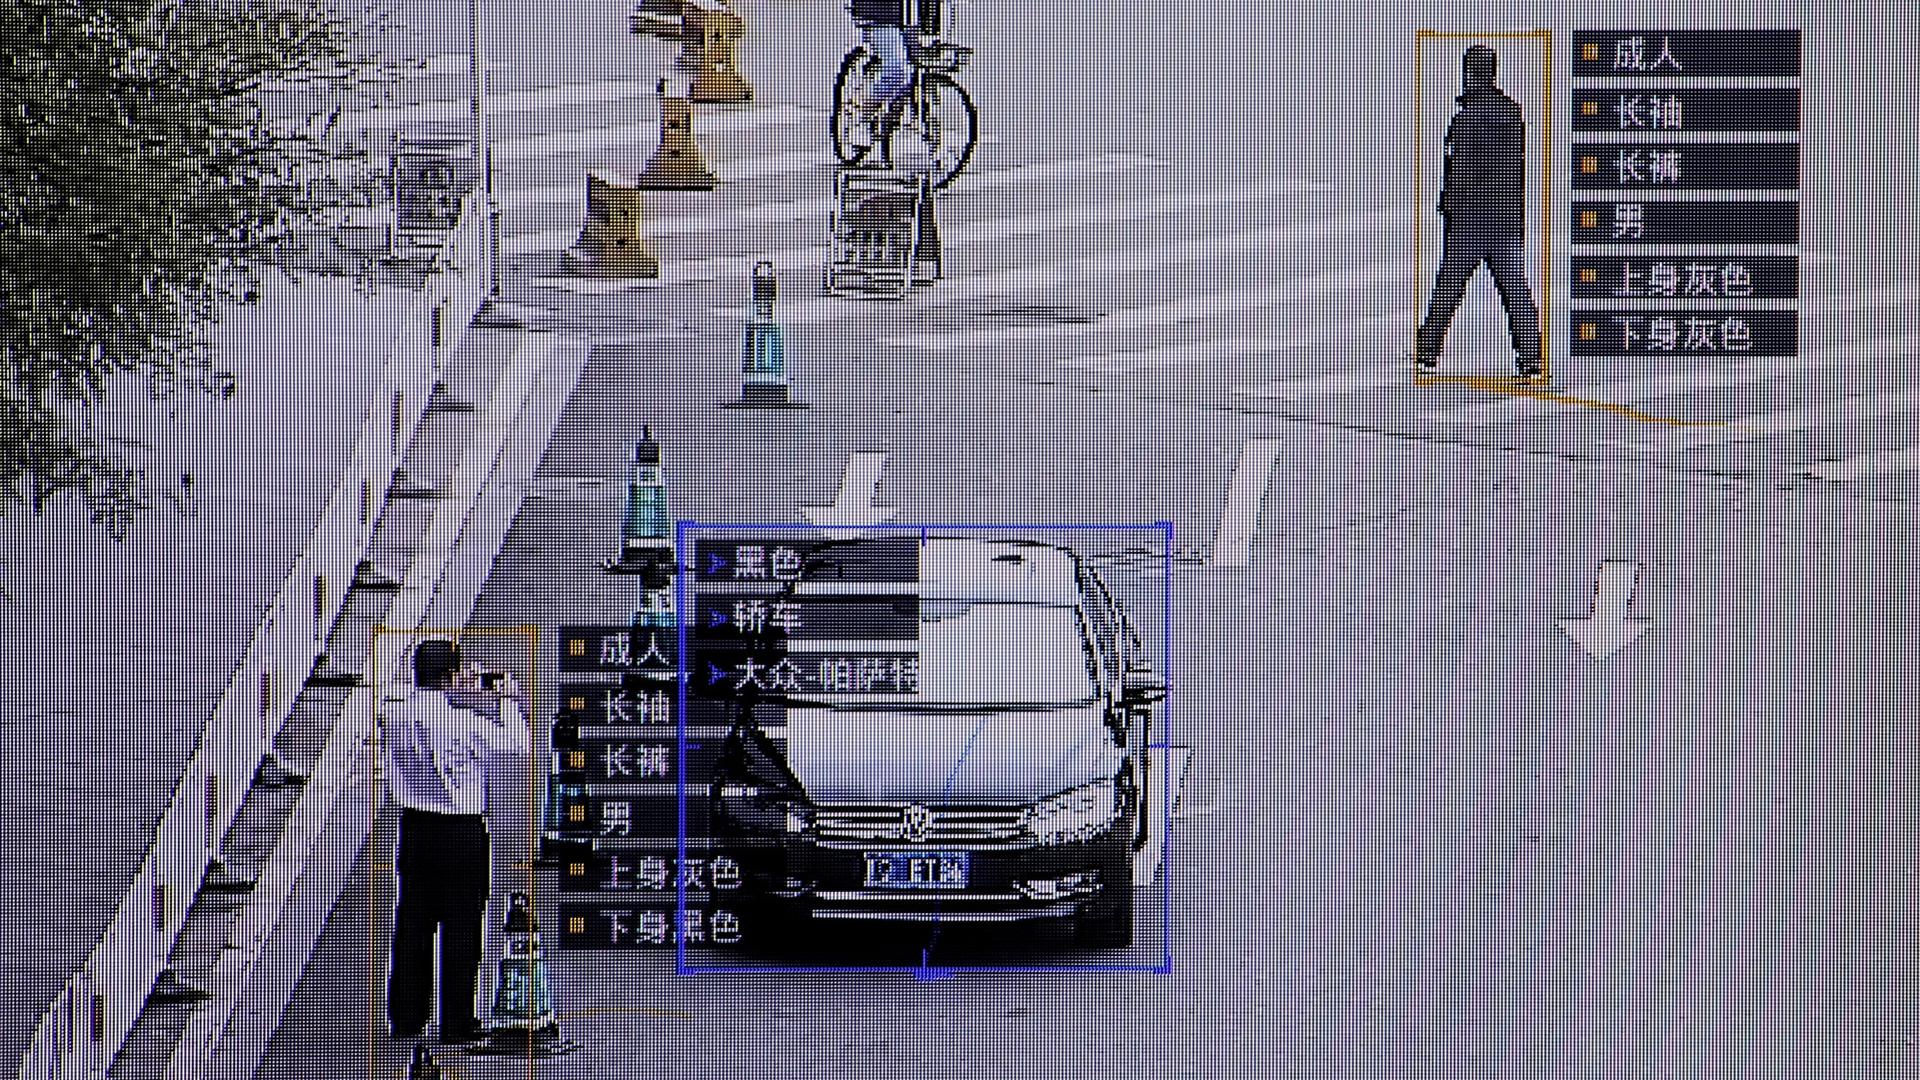 SenseTime surveillance software identifying details about people and vehicles showing the information layered on top of the screen.